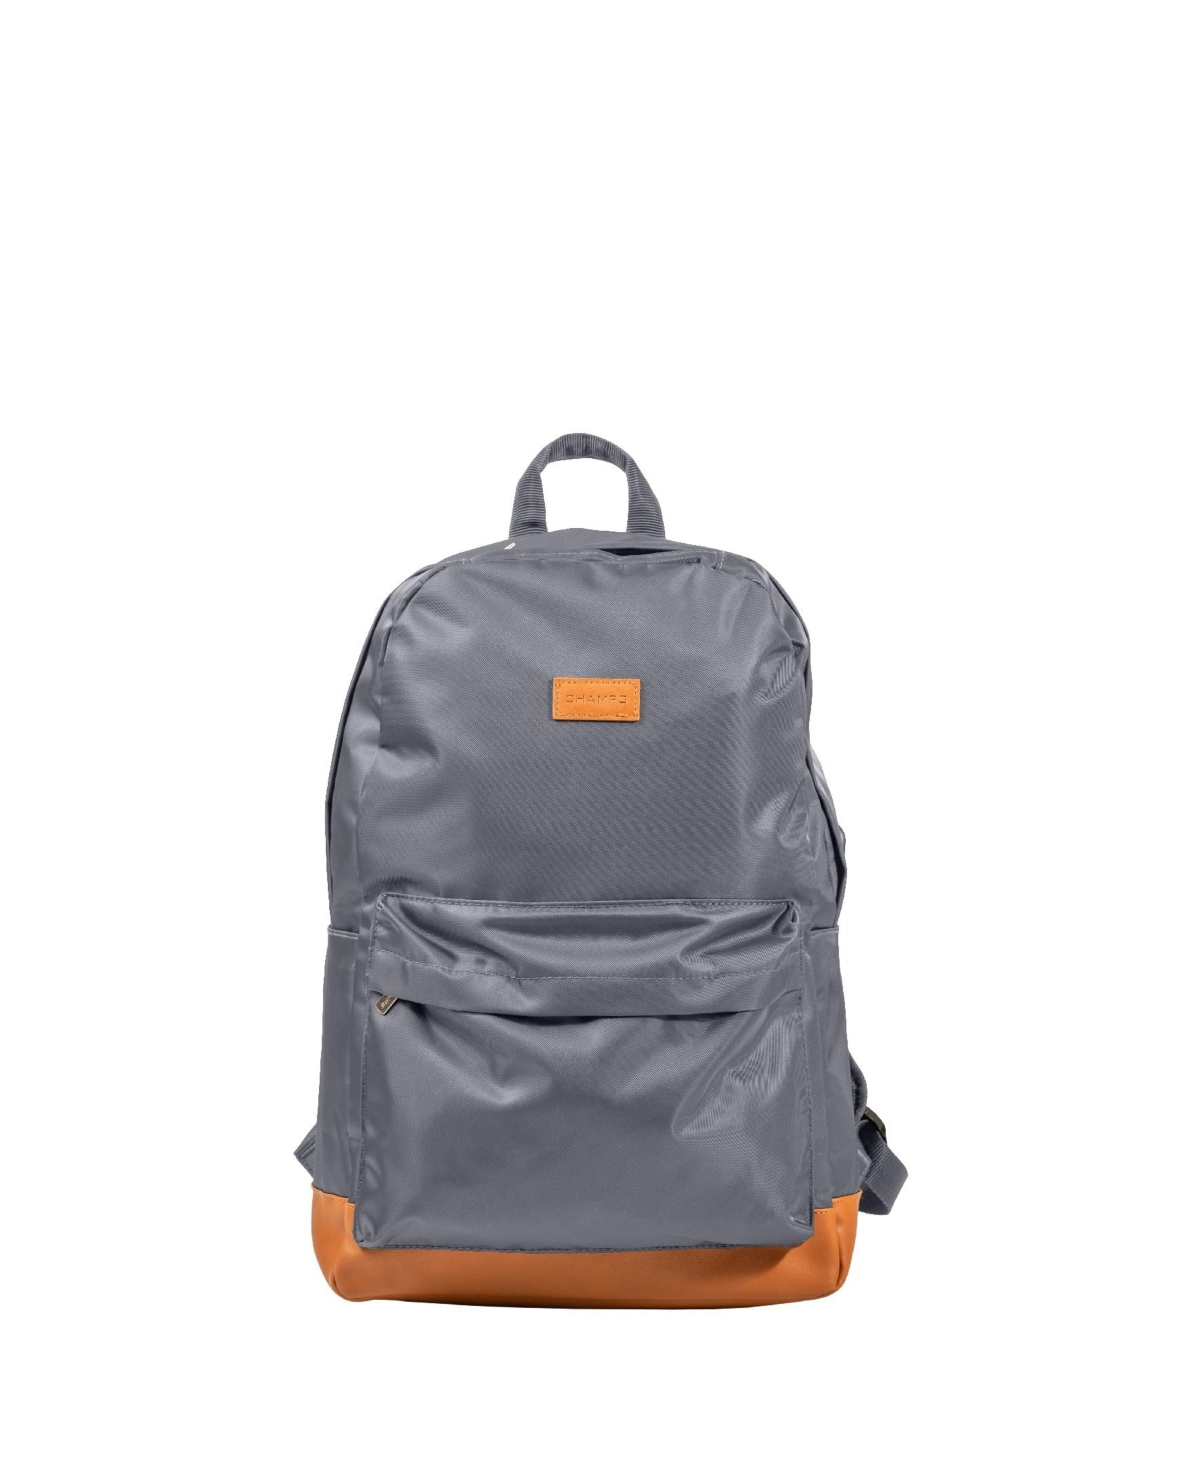 The Every Day Backpack - Navy